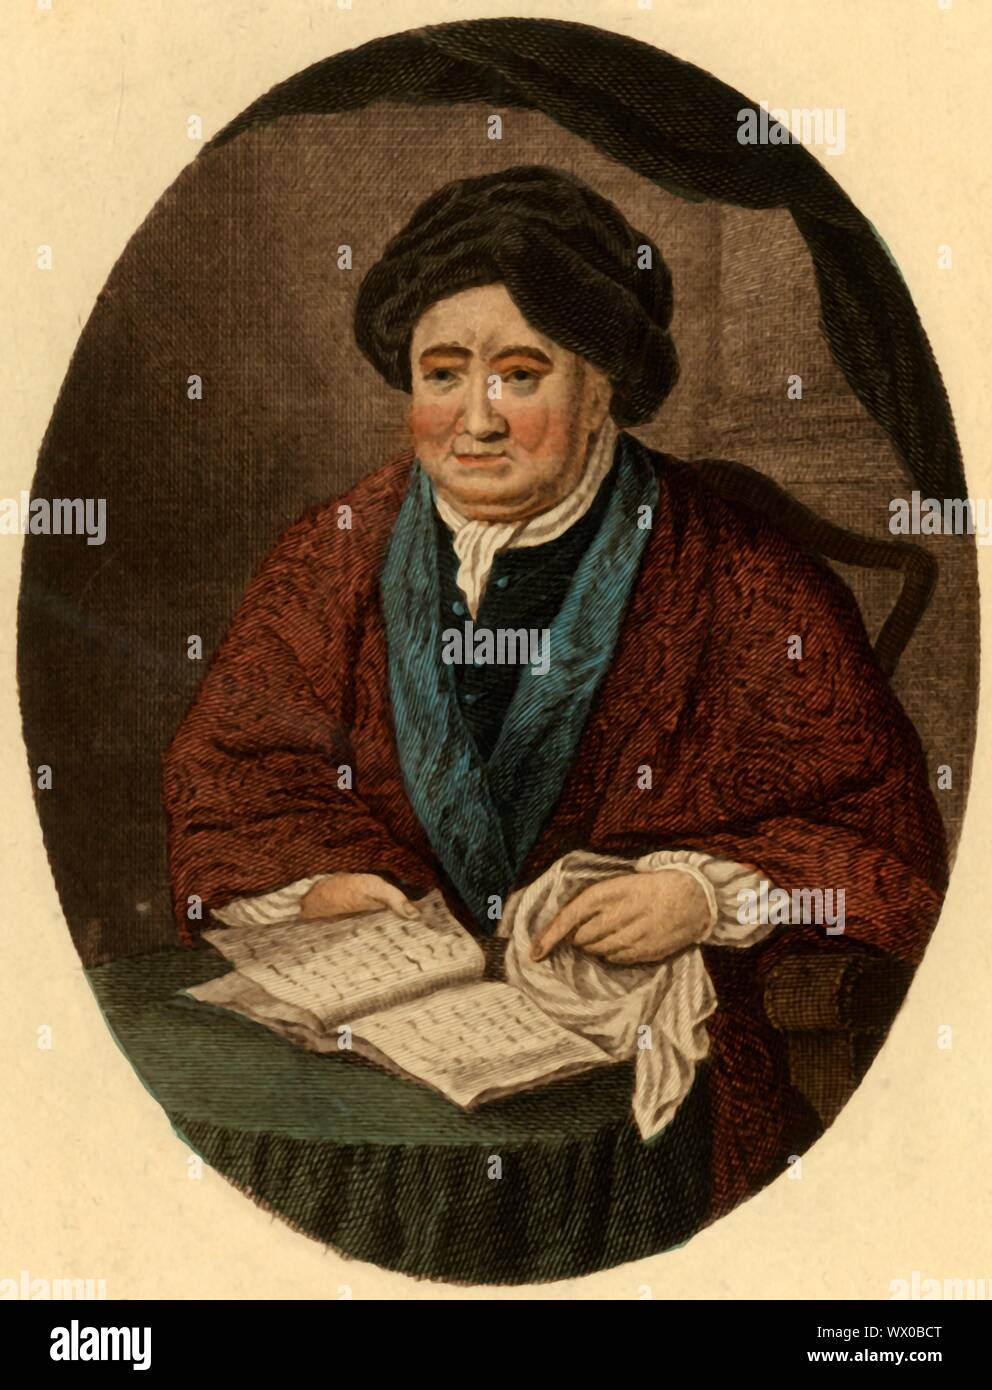 William Gostling, 1777, (1801). Portrait of English clergyman and antiquary William Gostling (1696-1777) at the age of 81, just before his death. [Andrew Moltino, London, 1801] Stock Photo